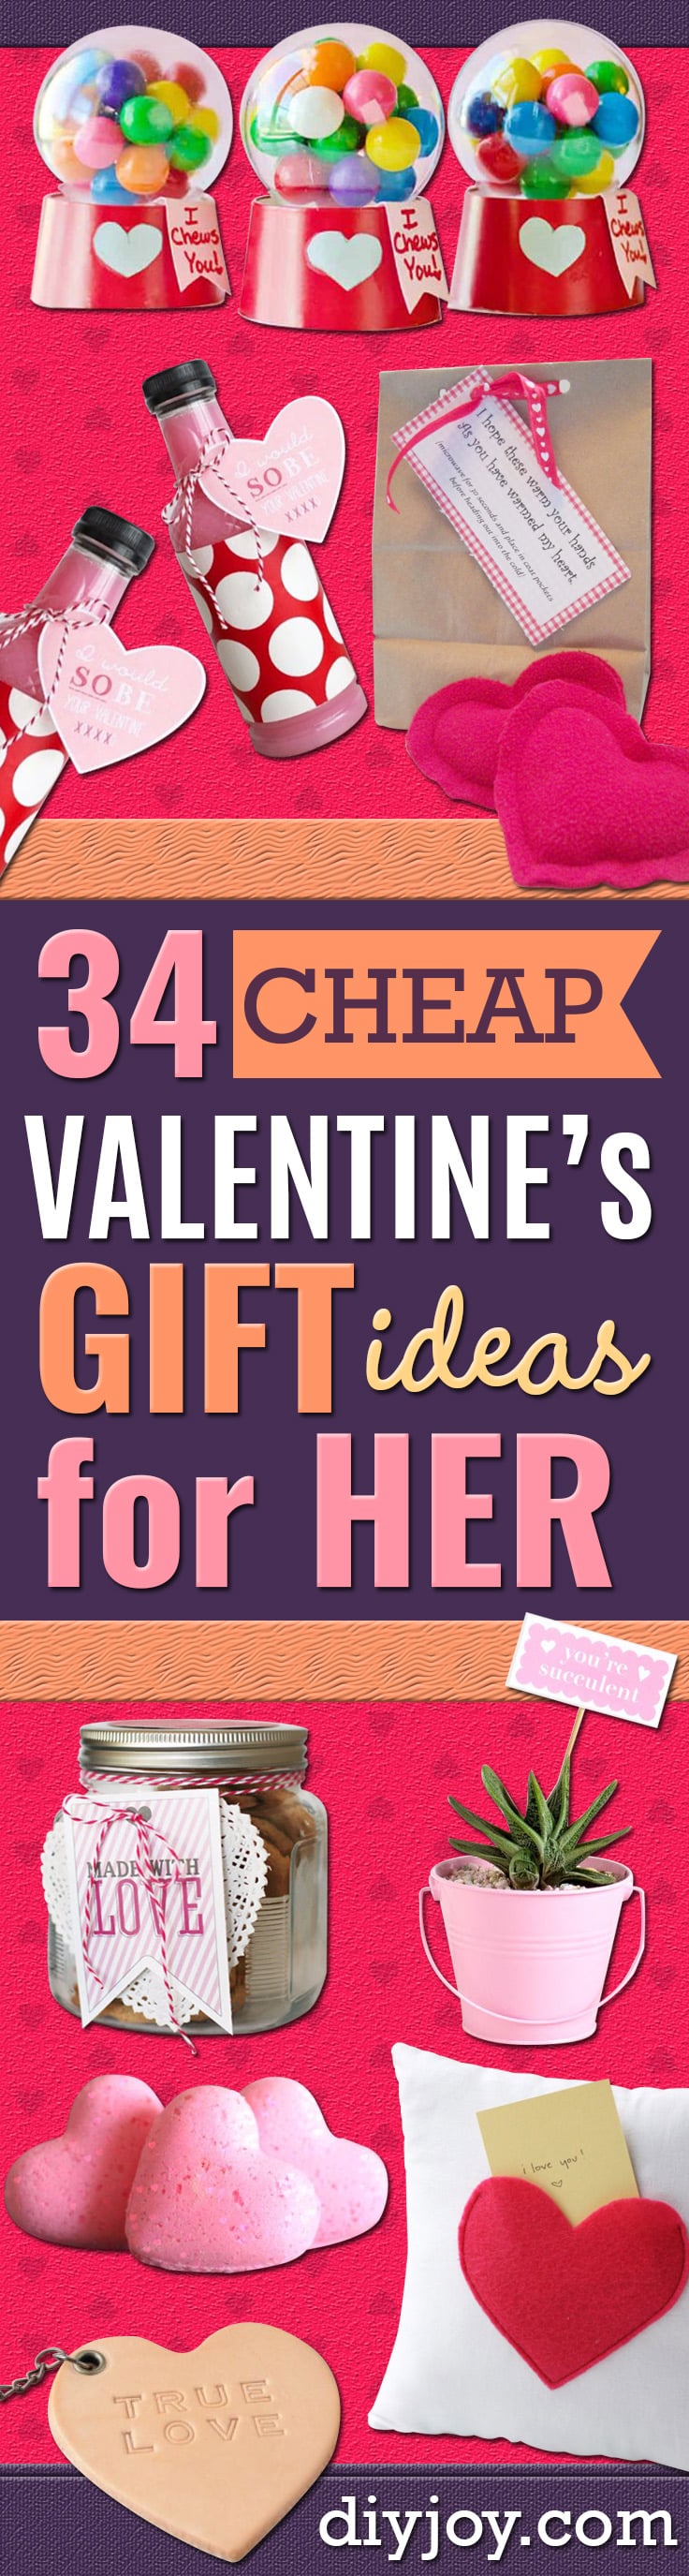 DIY Valentines Day Gifts for Her - Cool and Easy Things To Make for Your Wife, Girlfriend, Fiance - Creative and Cheap Do It Yourself Projects to Give Your Girl - Ladies Love These Ideas for Bath, Yard, Home and Kitchen, Outdoors - Make, Don't Buy Your Valentines for Women